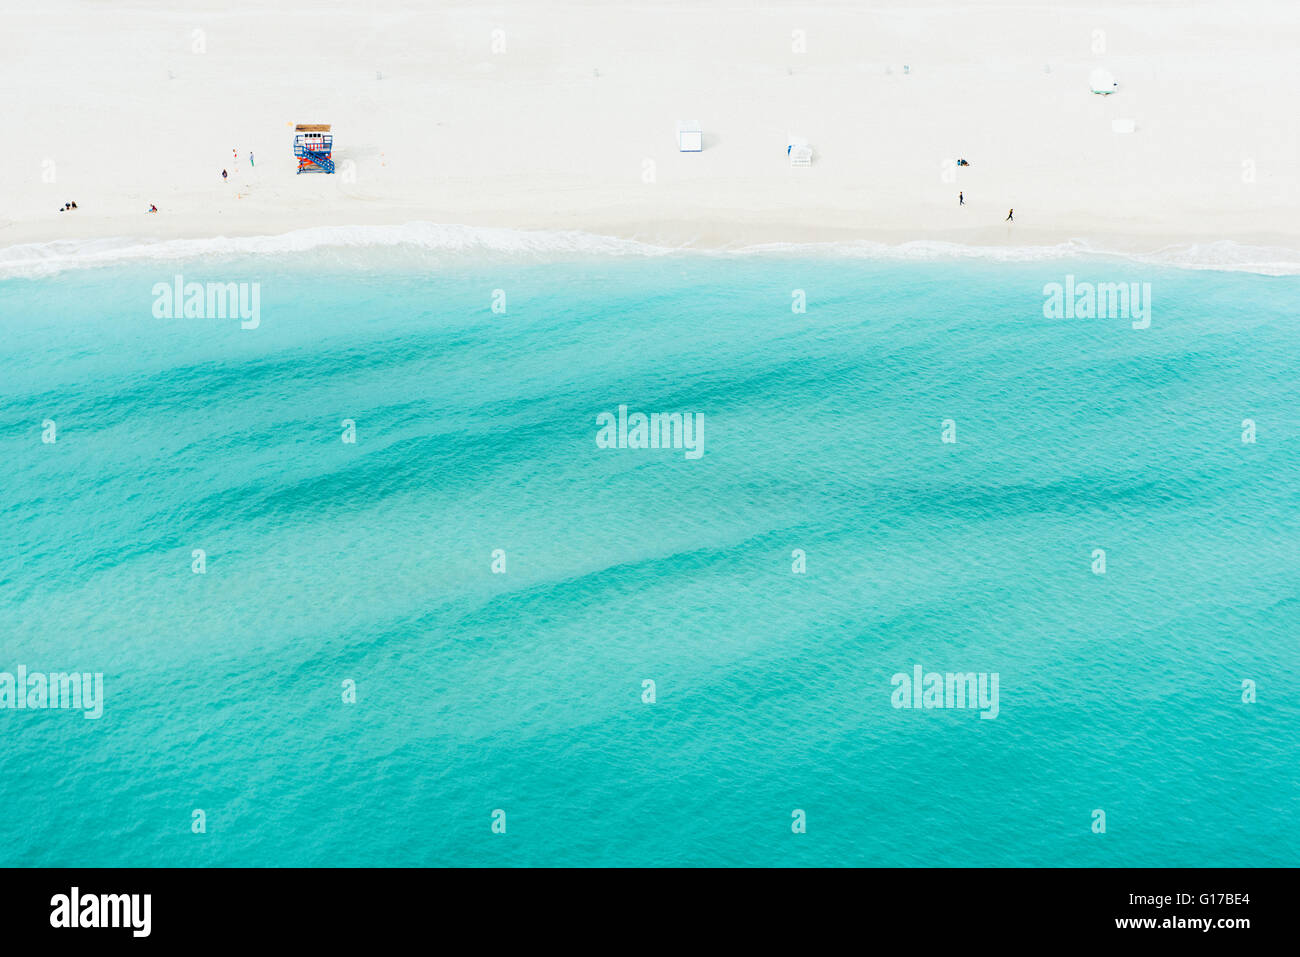 Aerial view of lifeguard tower and tourists by coastline, South beach, Miami, Florida, USA Stock Photo